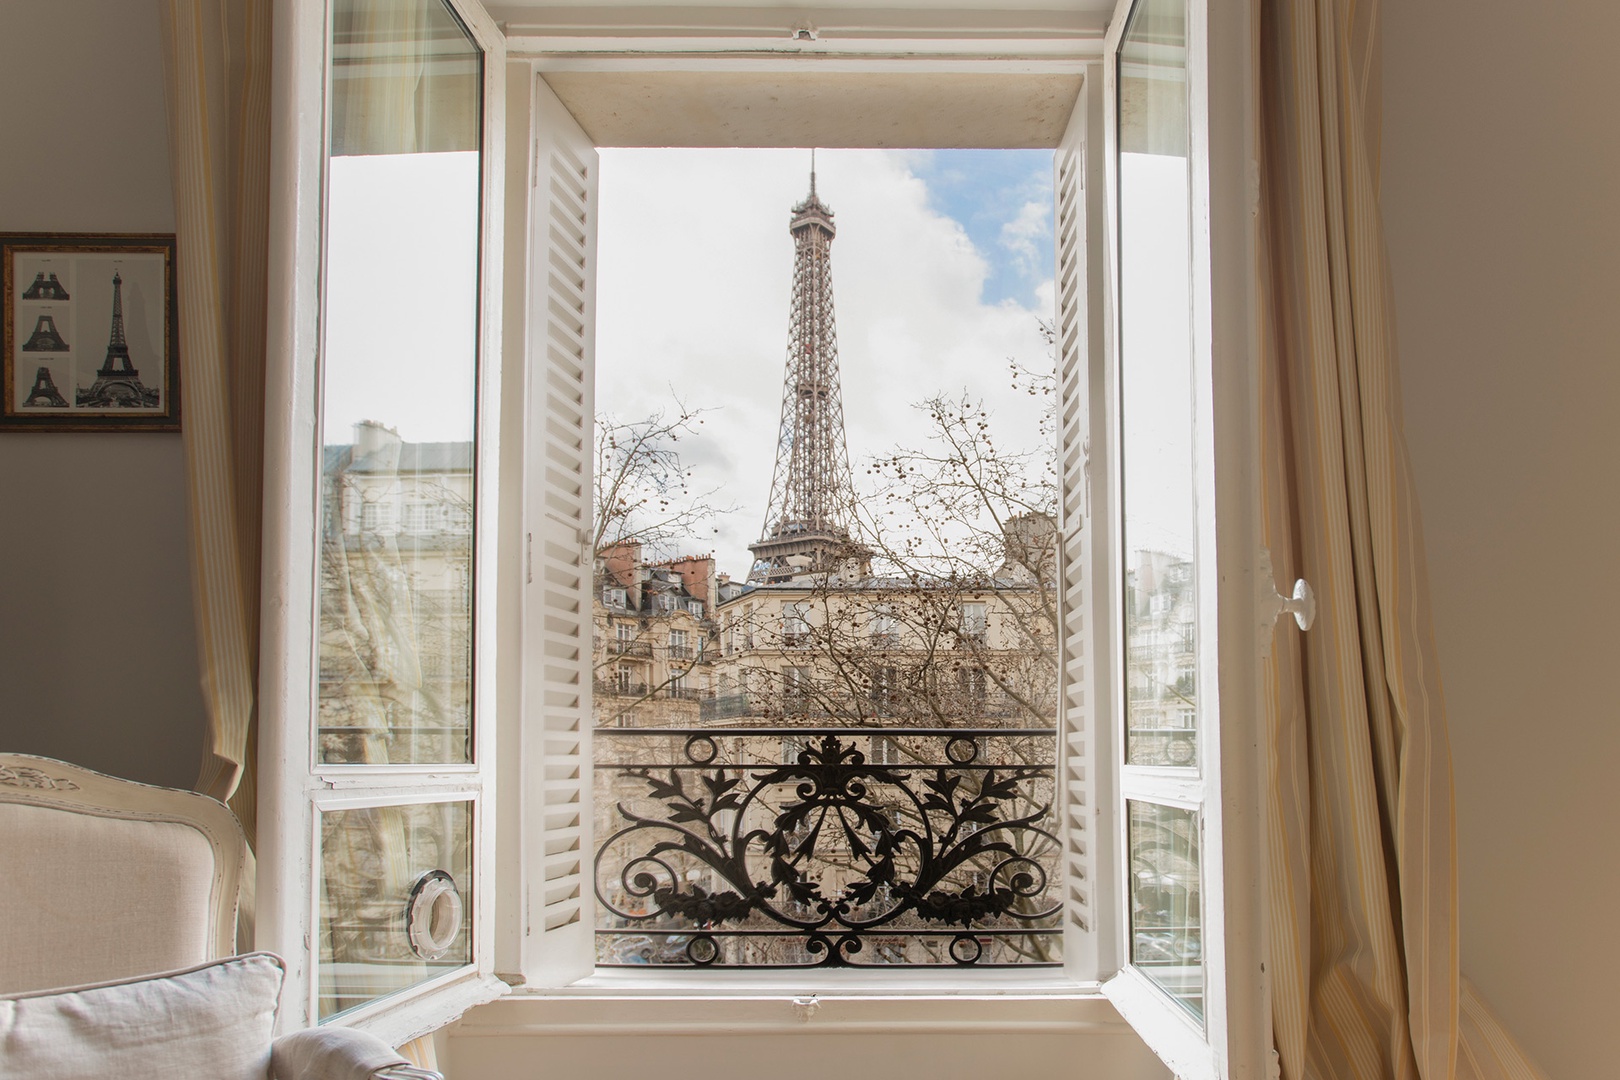 Welcome to the Jasnieres rental with picture-perfect views of the Eiffel Tower!